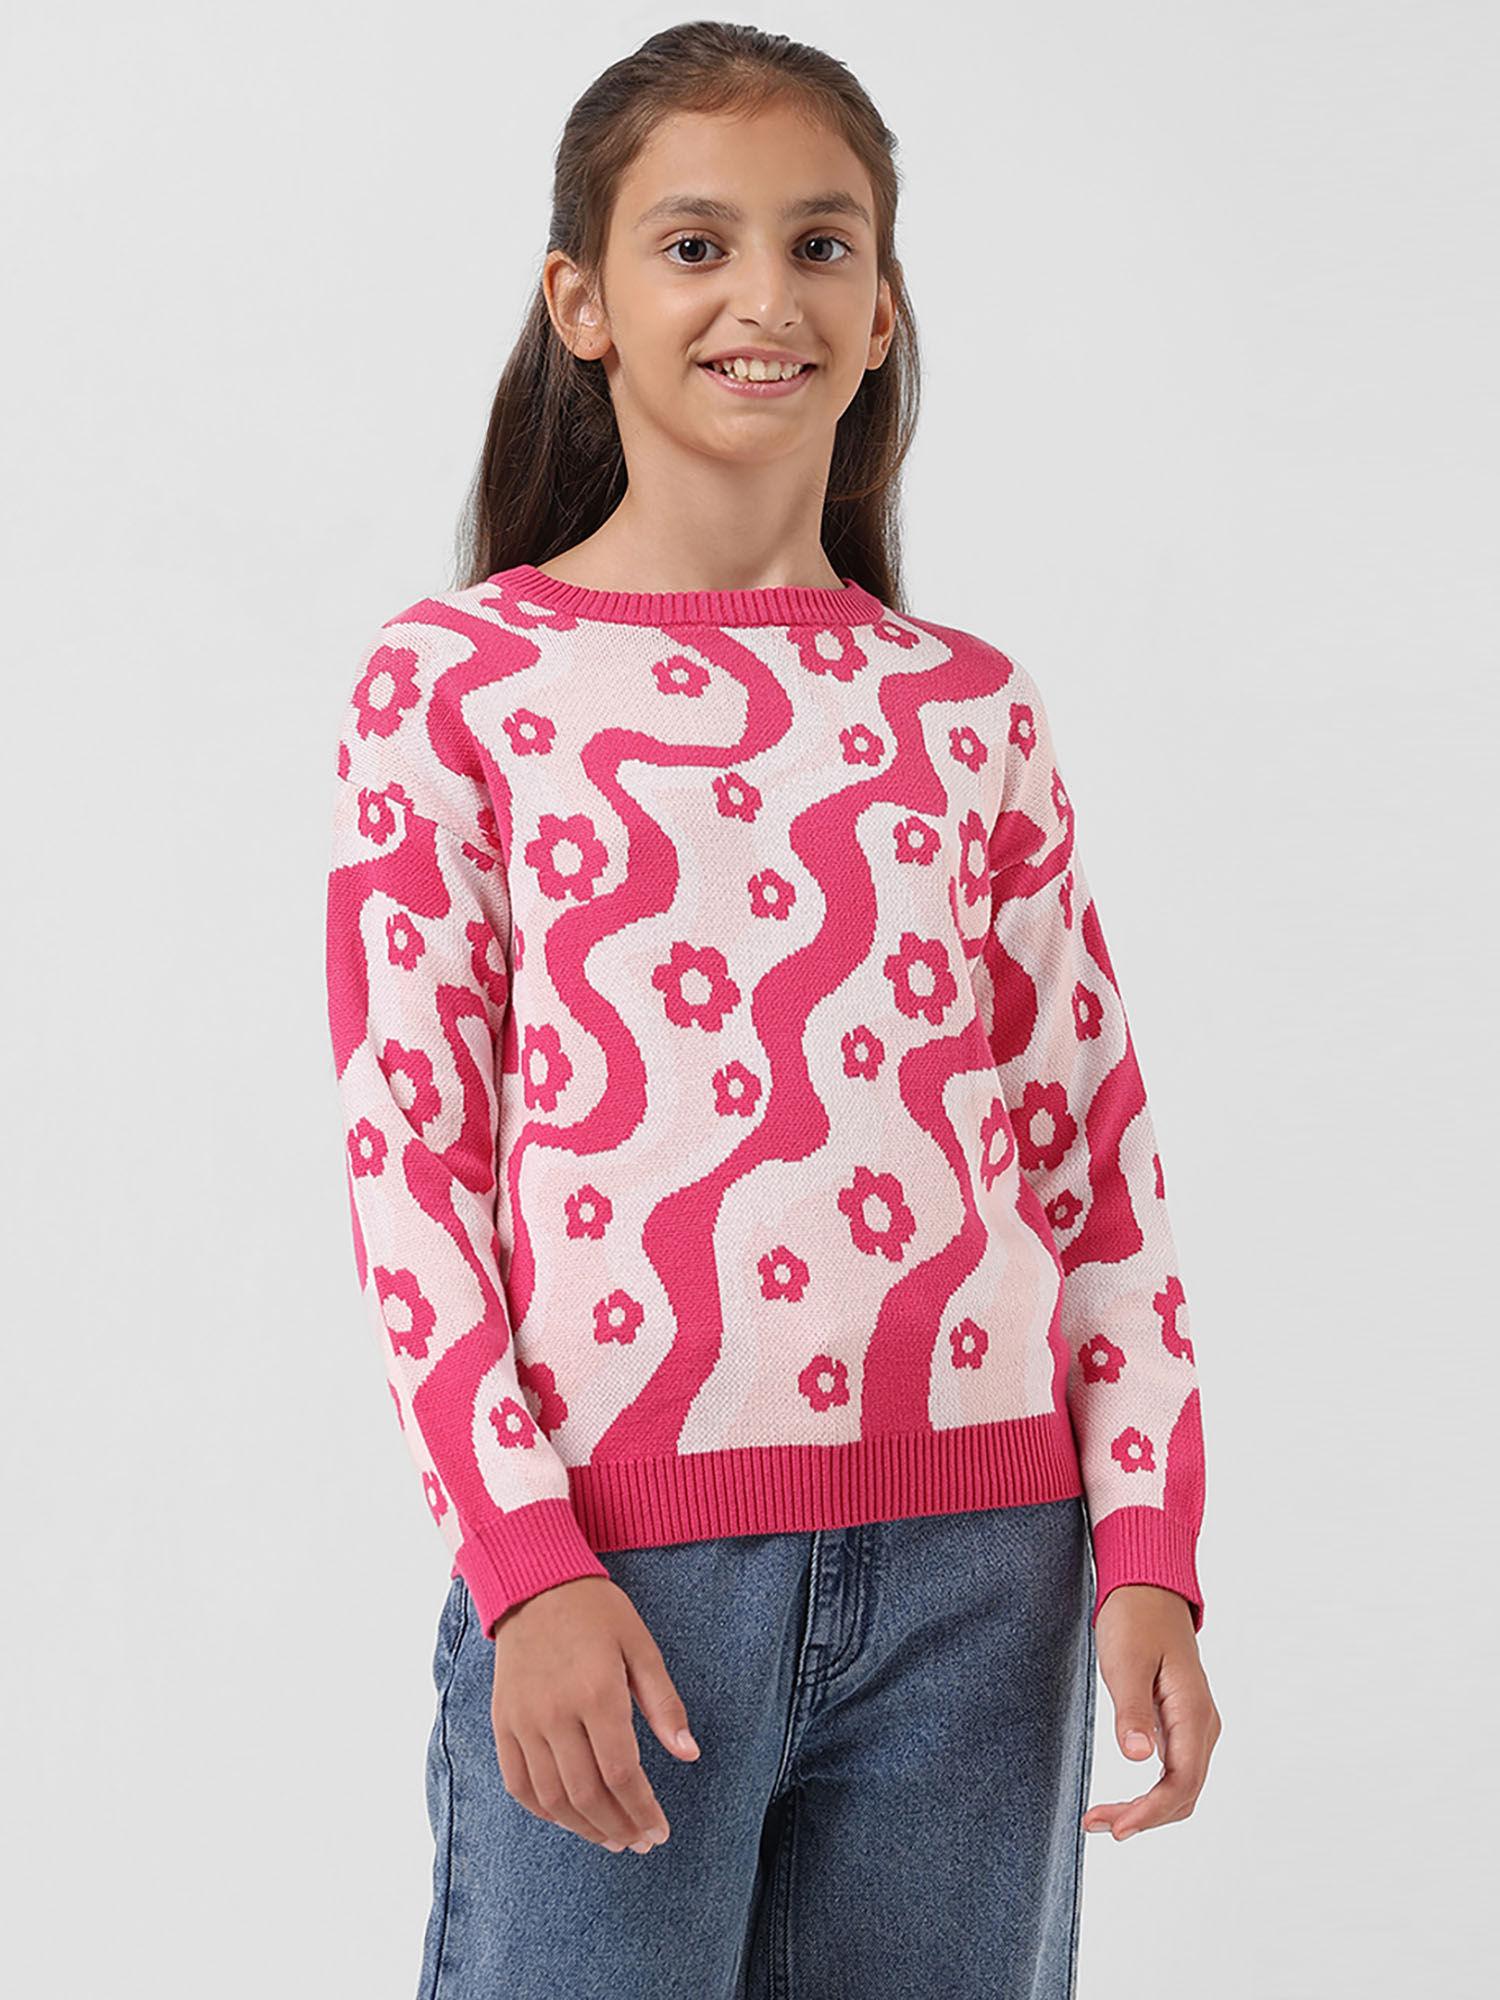 Girls Floral Print Pink Sweater